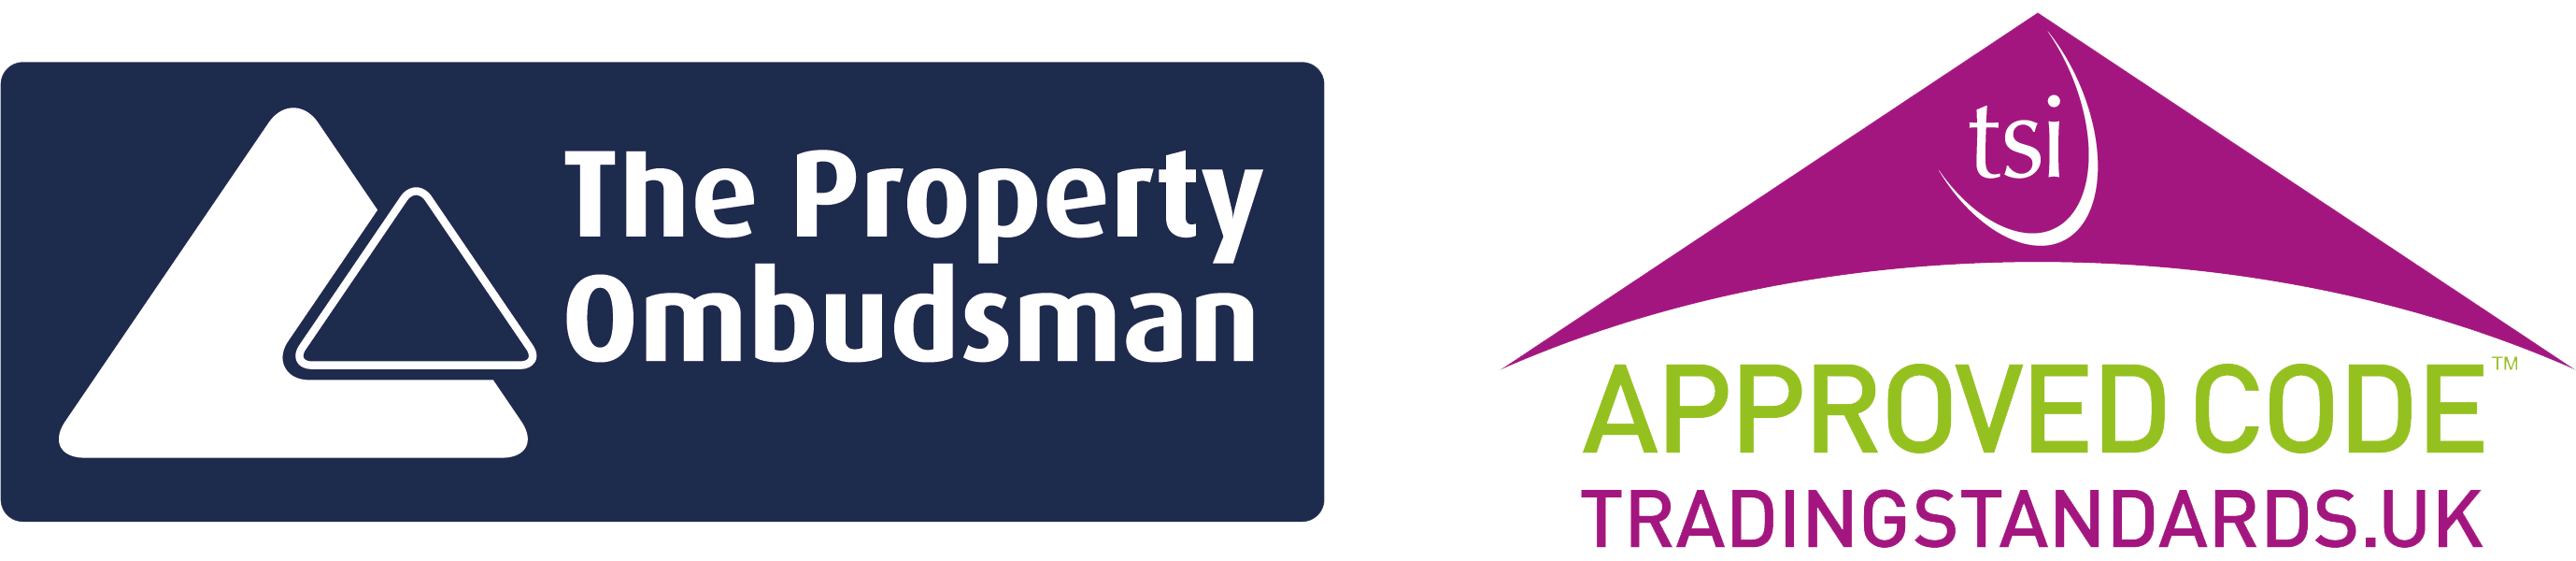 The Property Ombudsman and Chartered Trading Standards Institute logos